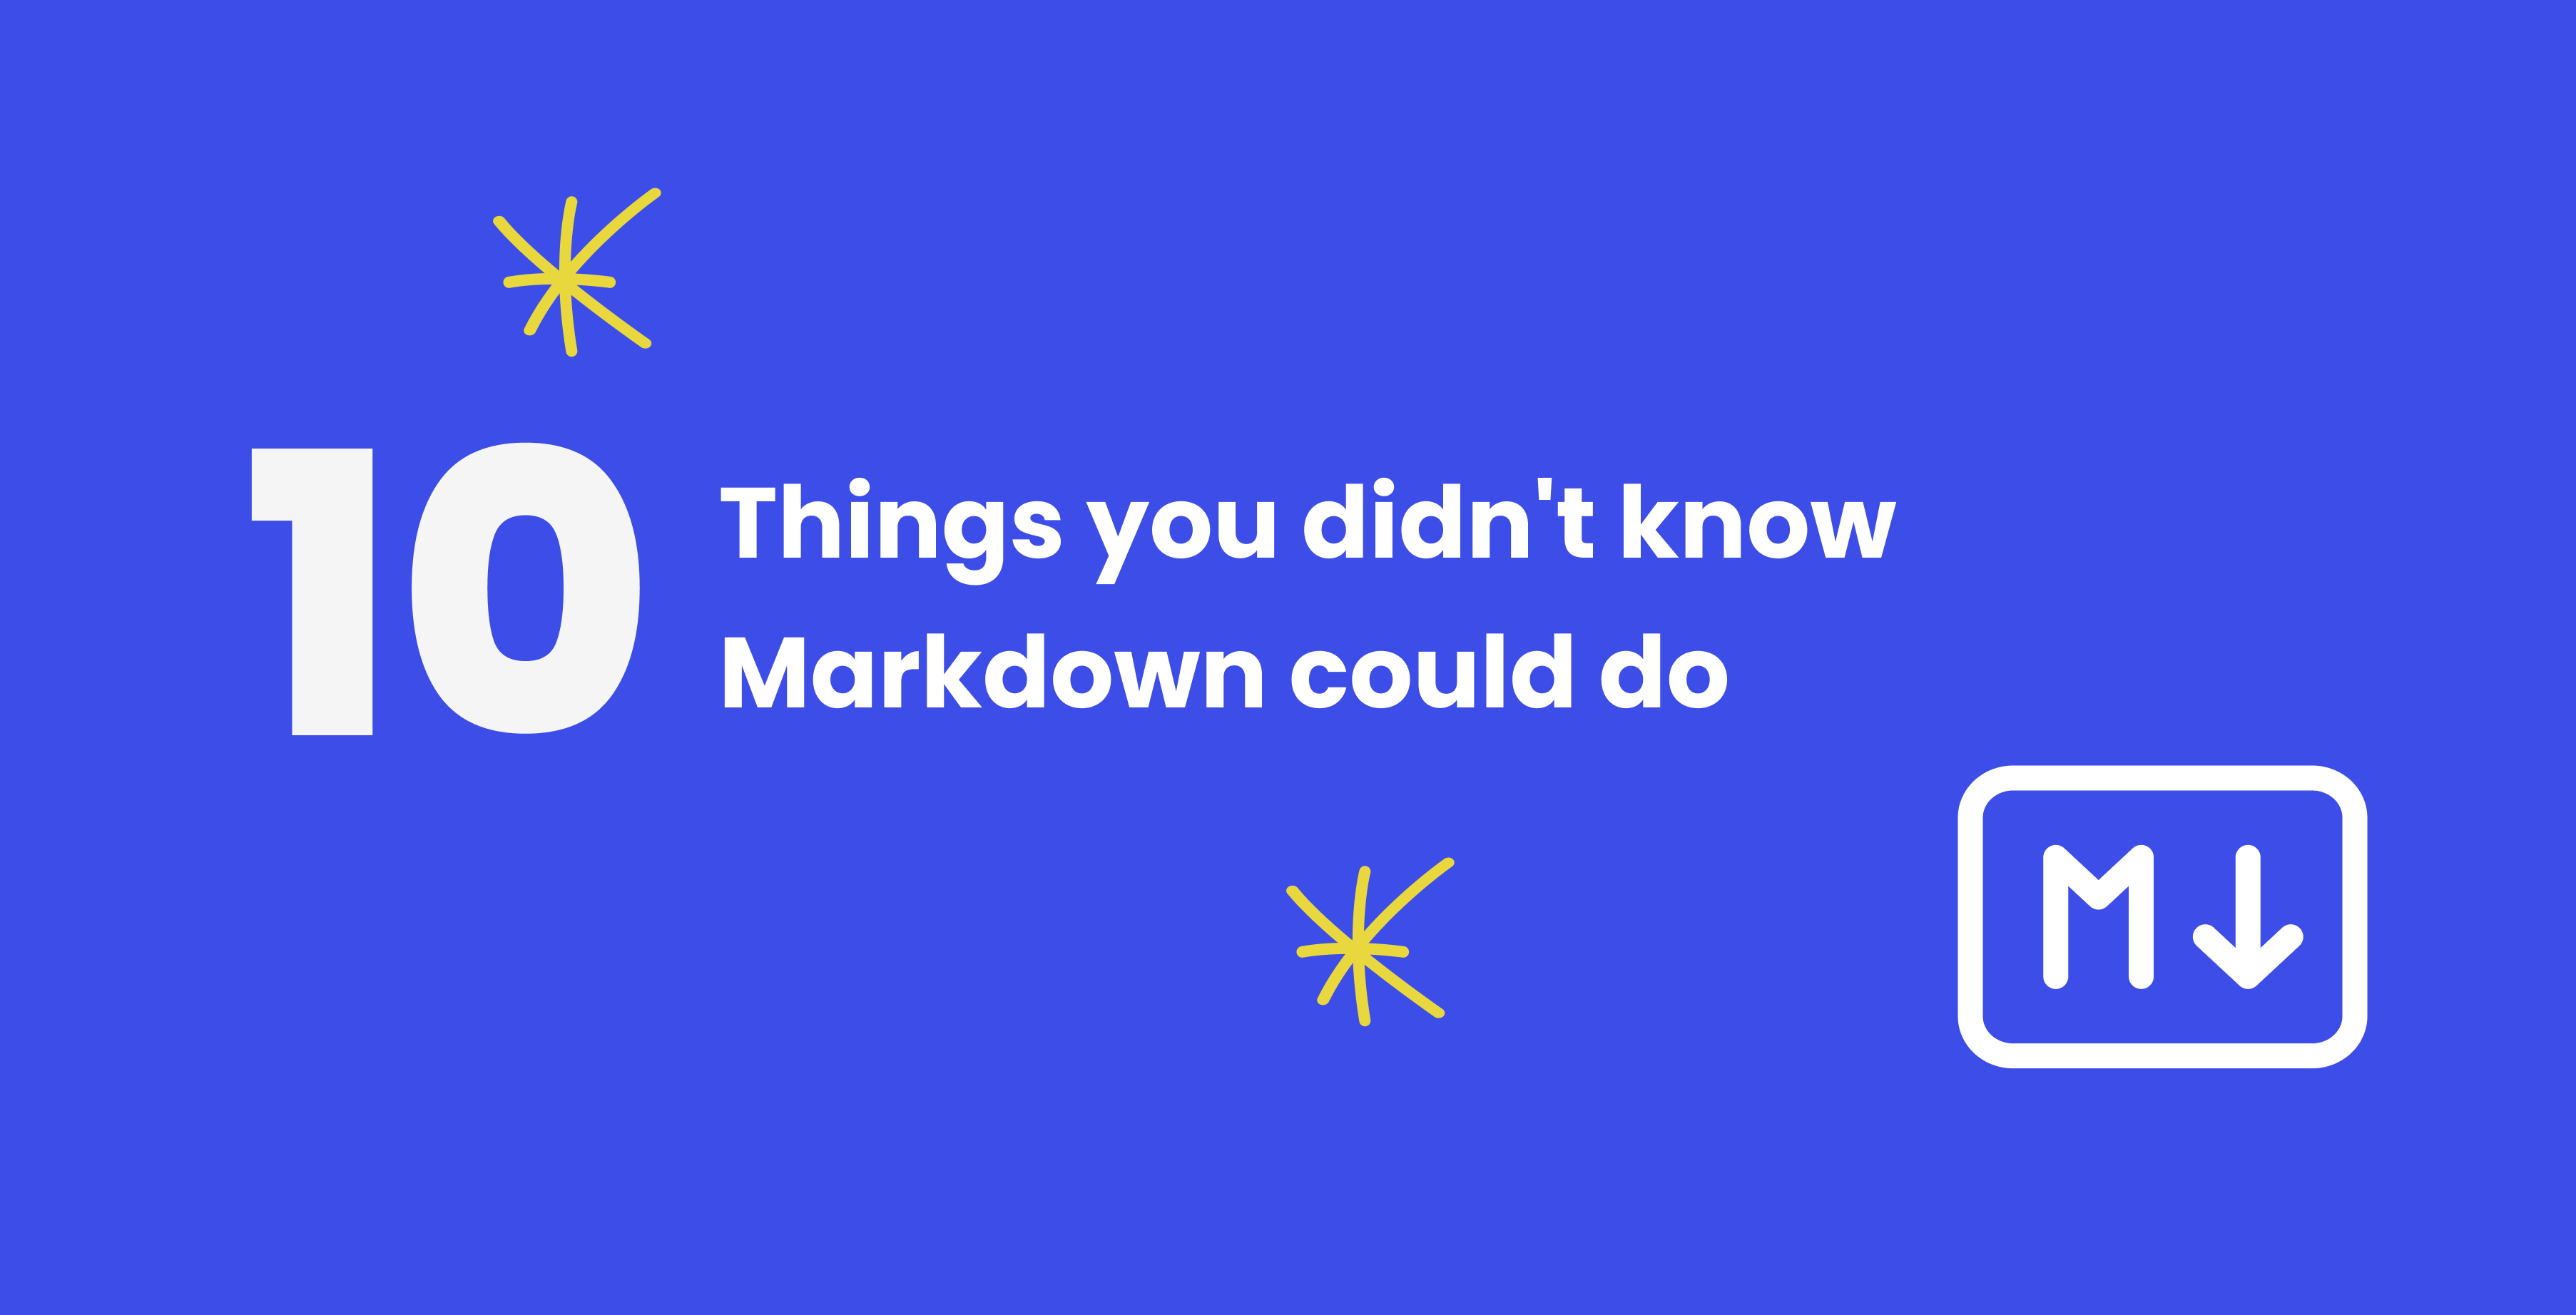 10 Things You Didn't Know Markdown Could Do